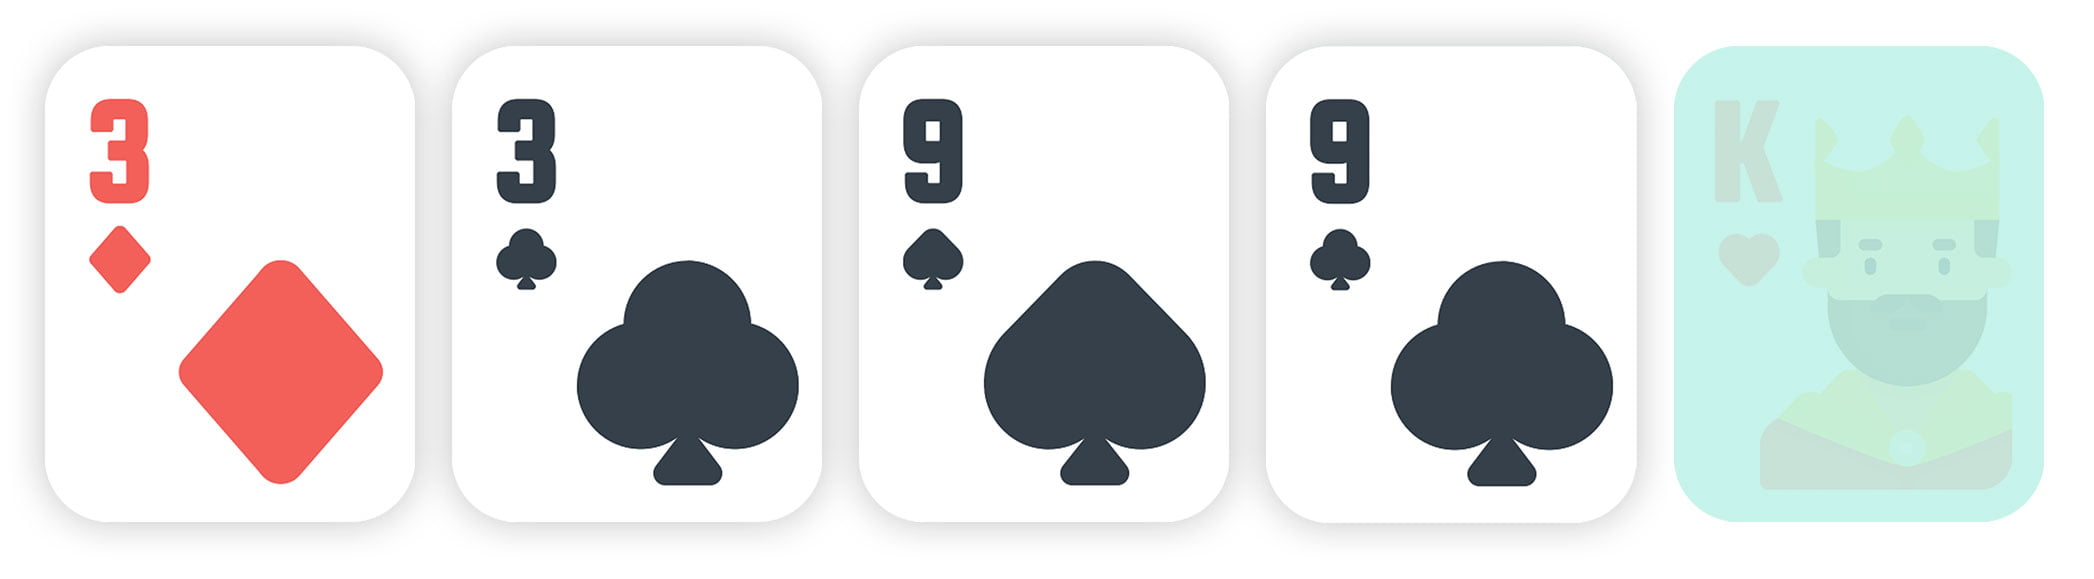 two pair - how to play poker